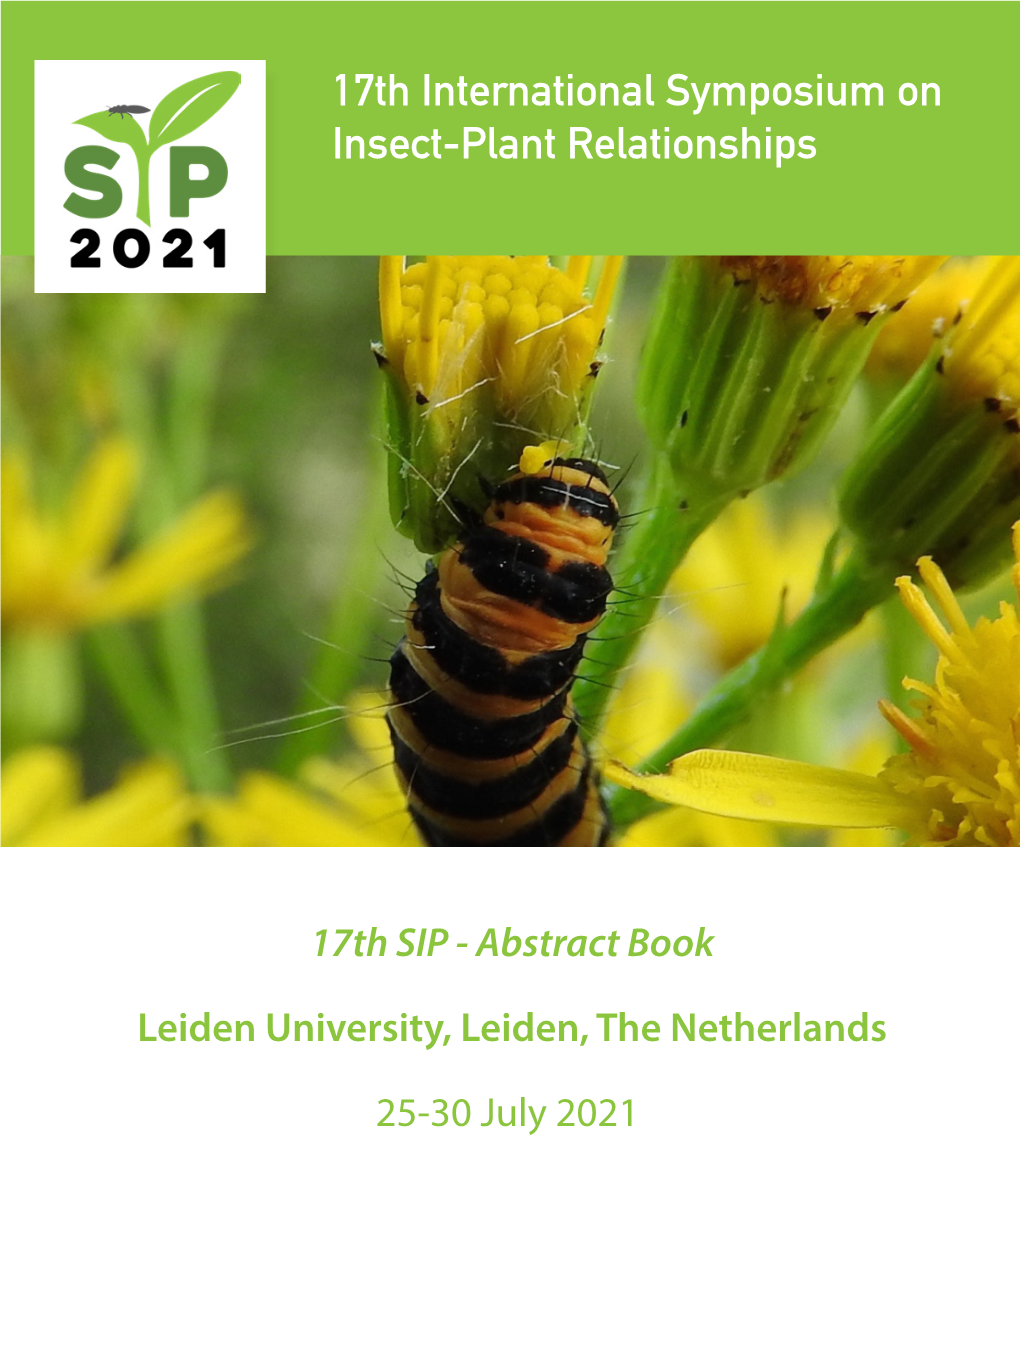 17Th International Symposium on Insect-Plant Relationships